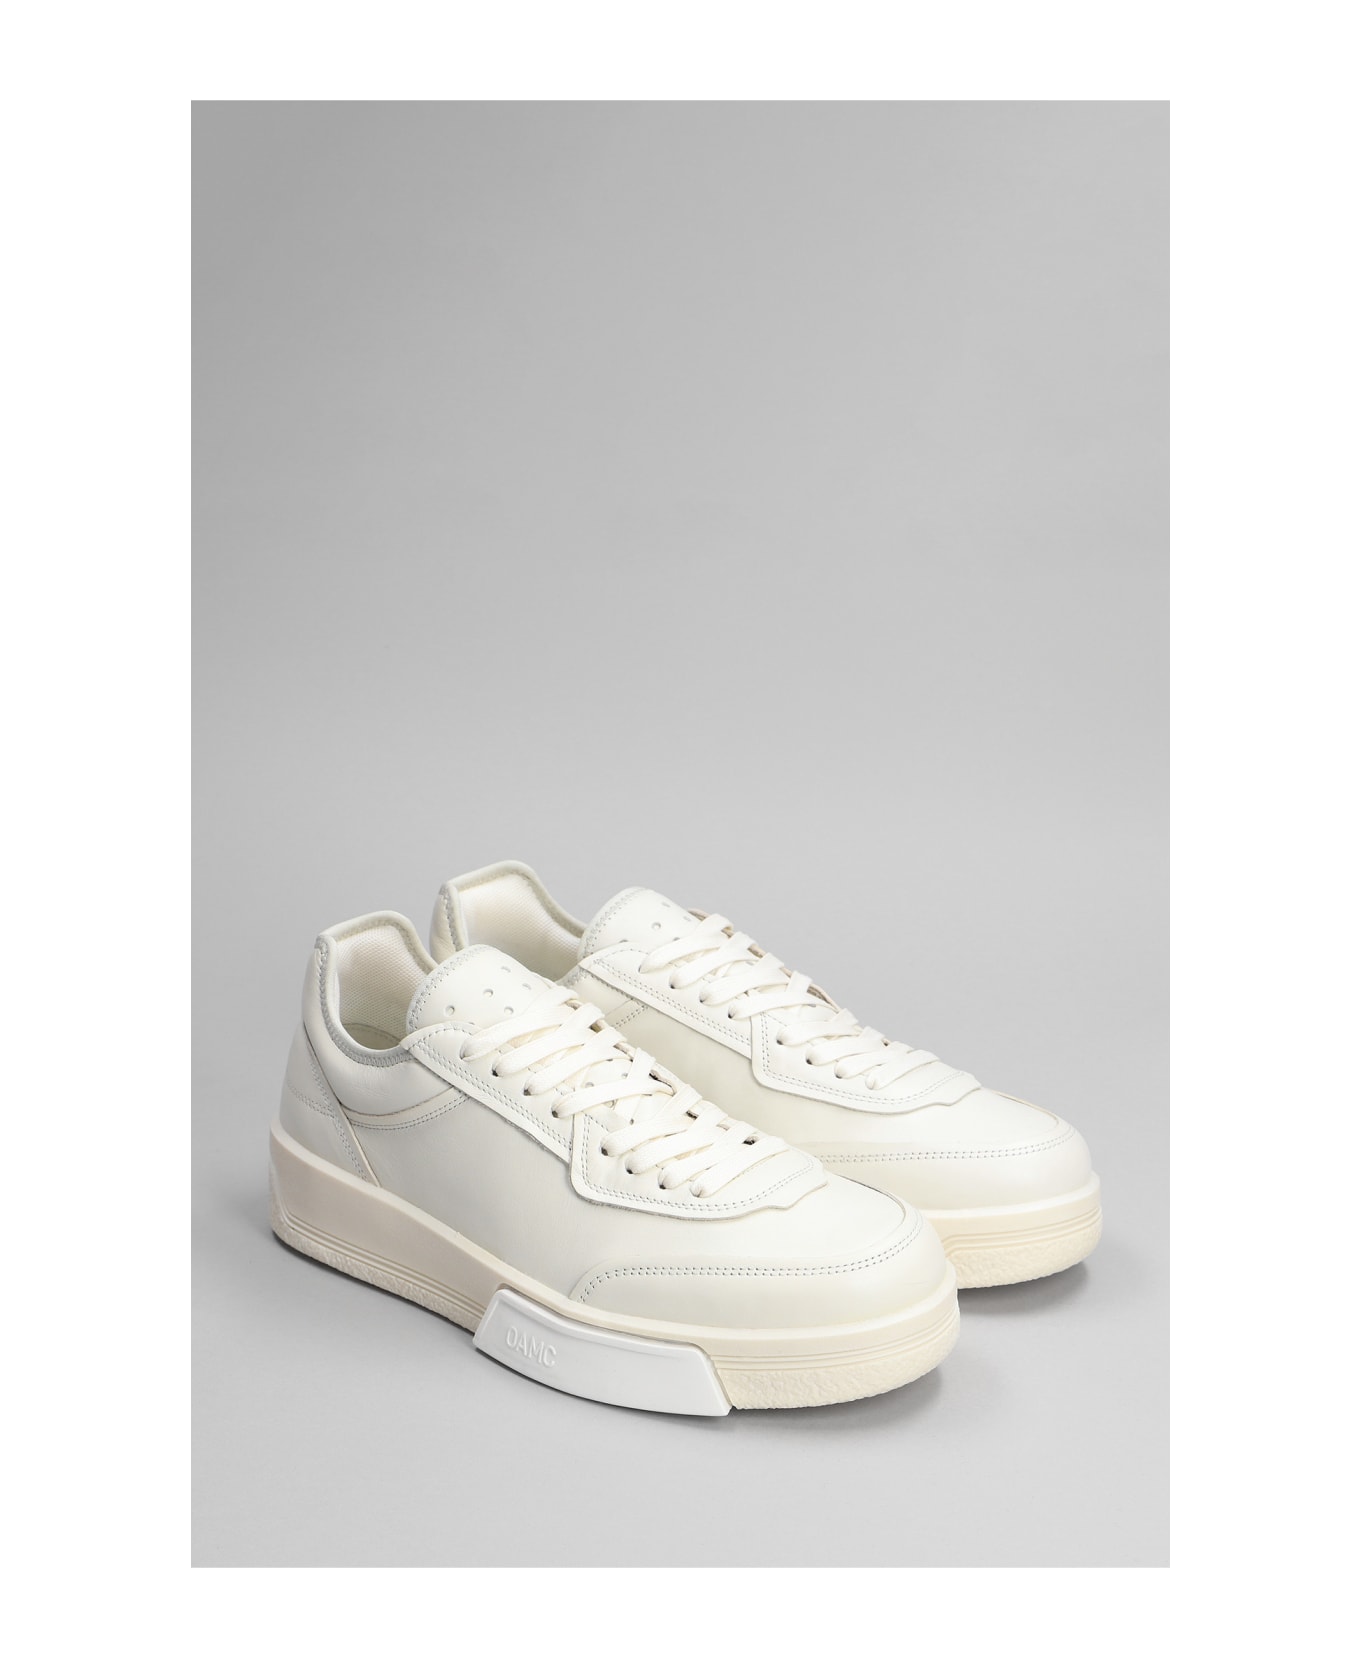 OAMC Cosmos Sneakers In White Leather